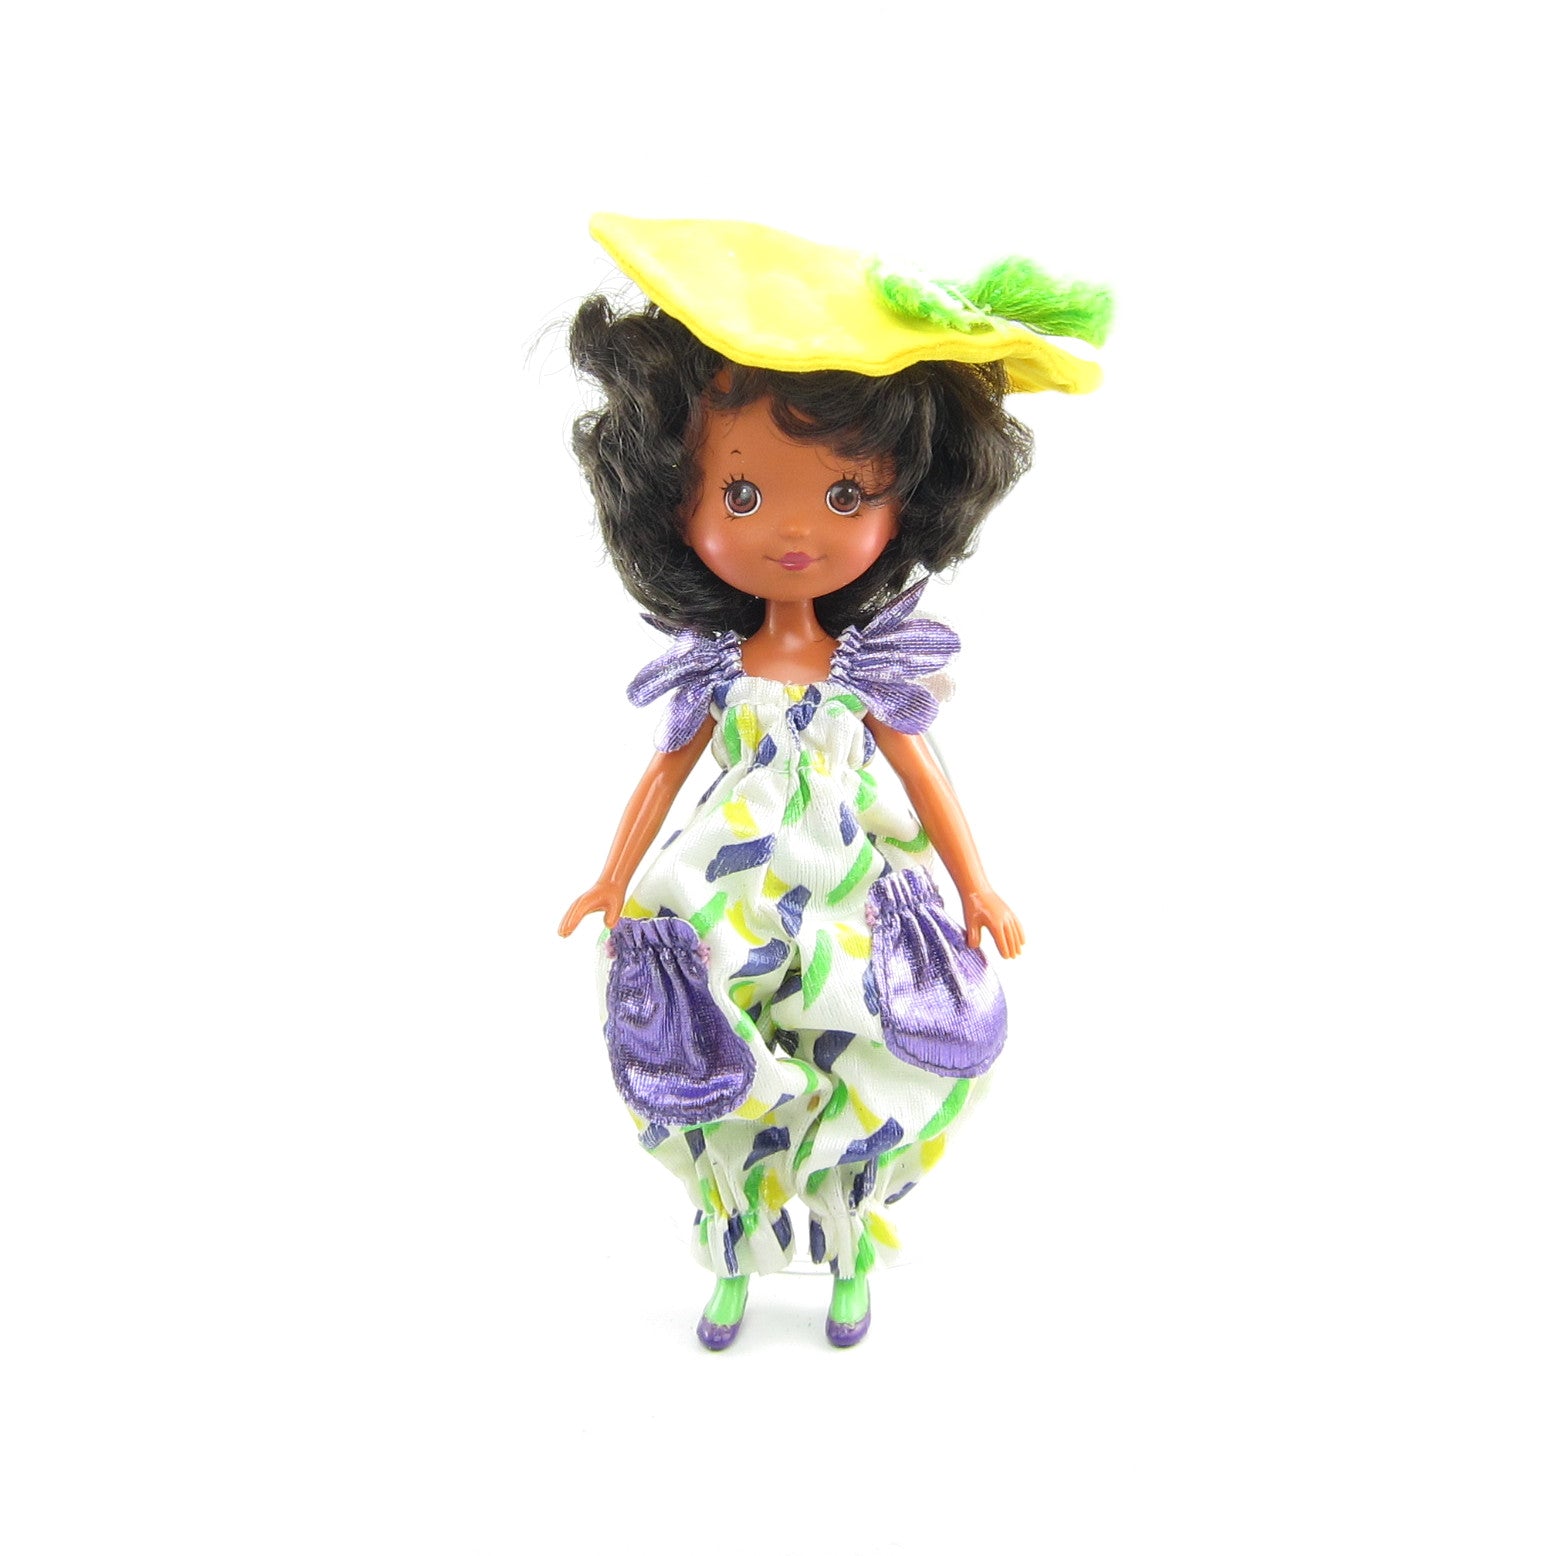 Painting Posies jumpsuit yellow hat for Rose Petal Place dolls